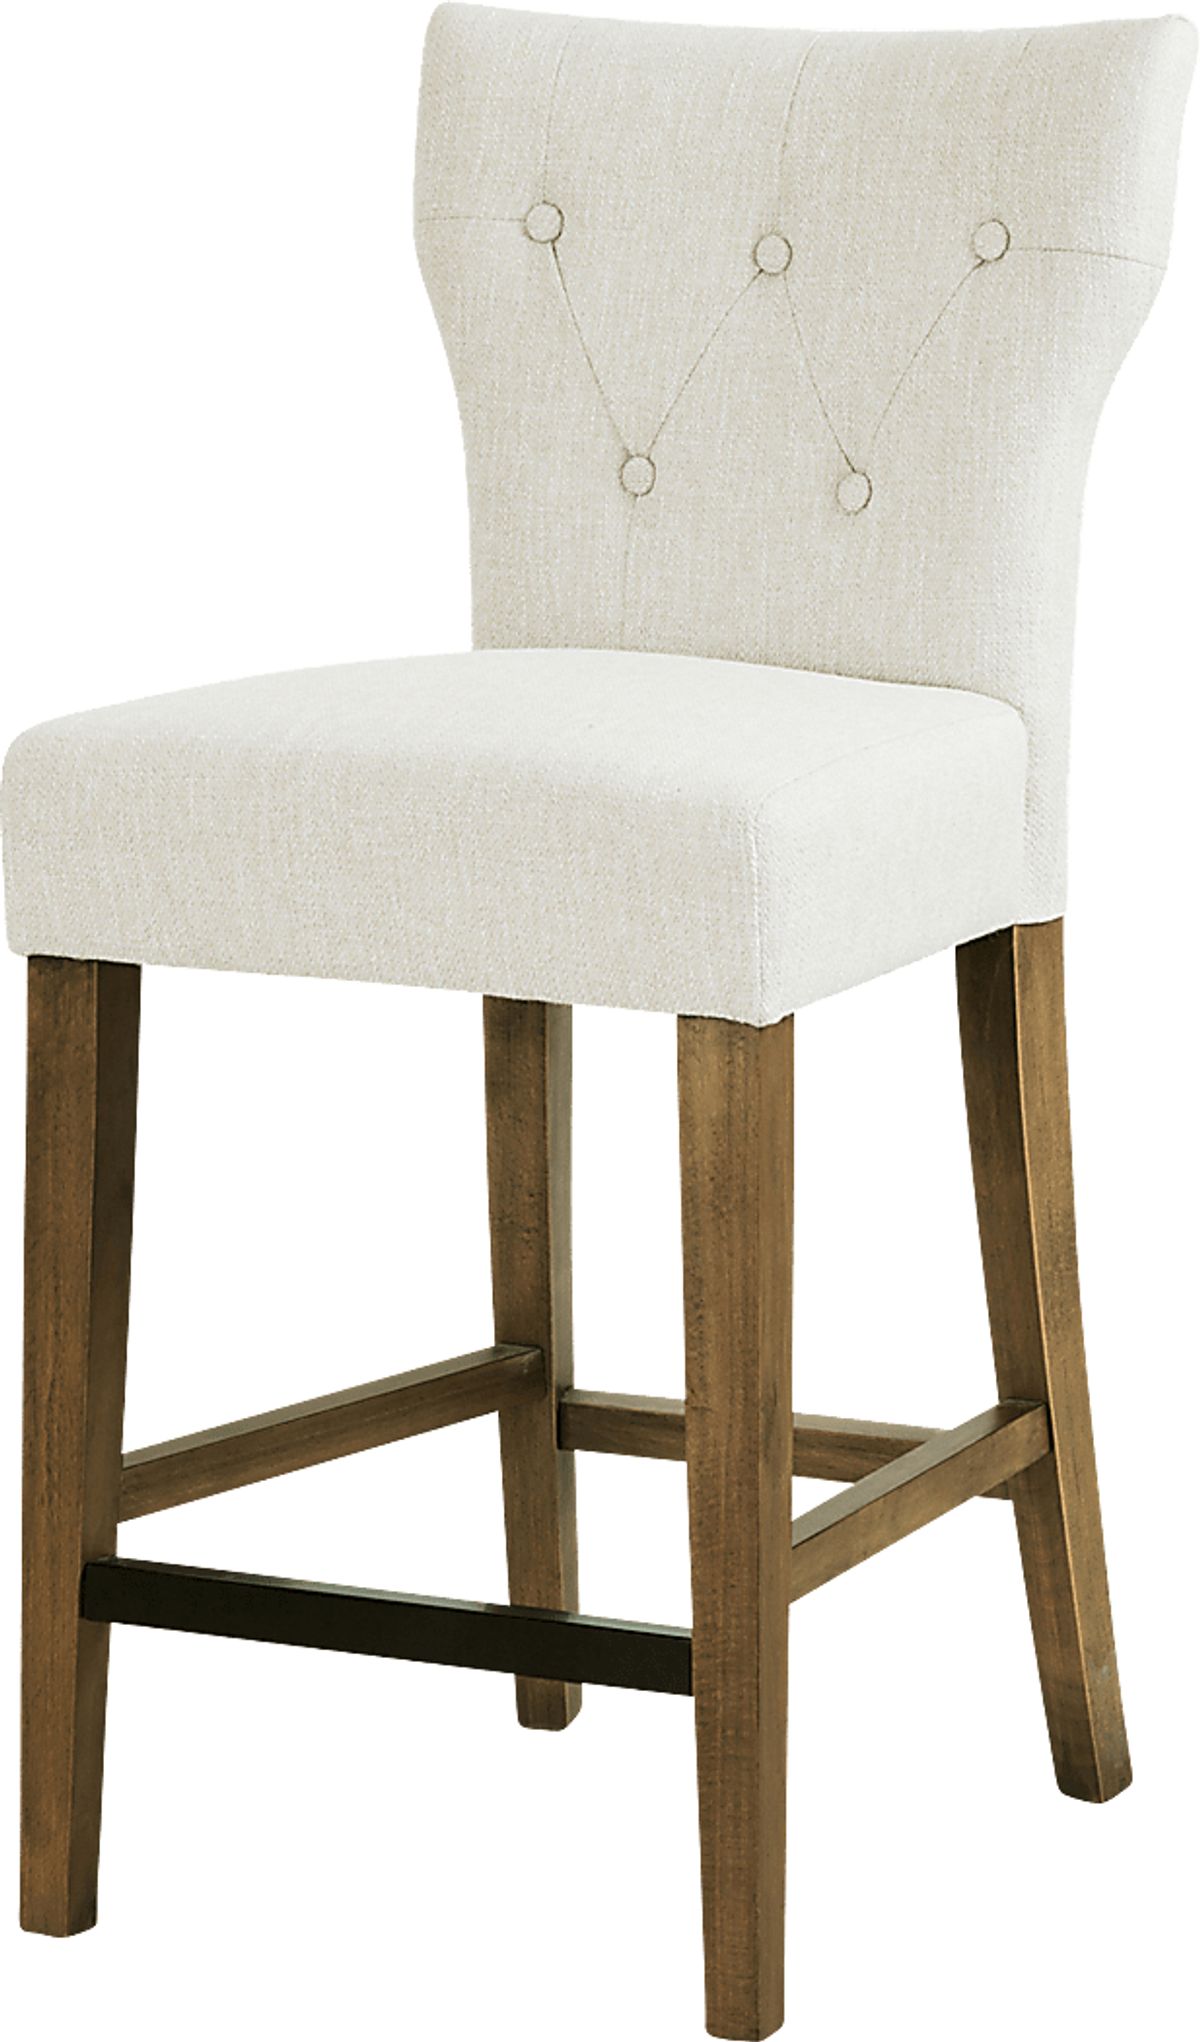 Oakendell Cream Counter Height Stool 41405312 Image Item?cache Id=caa7154b82dfa067d378a2cde2f5be3e&w=1200